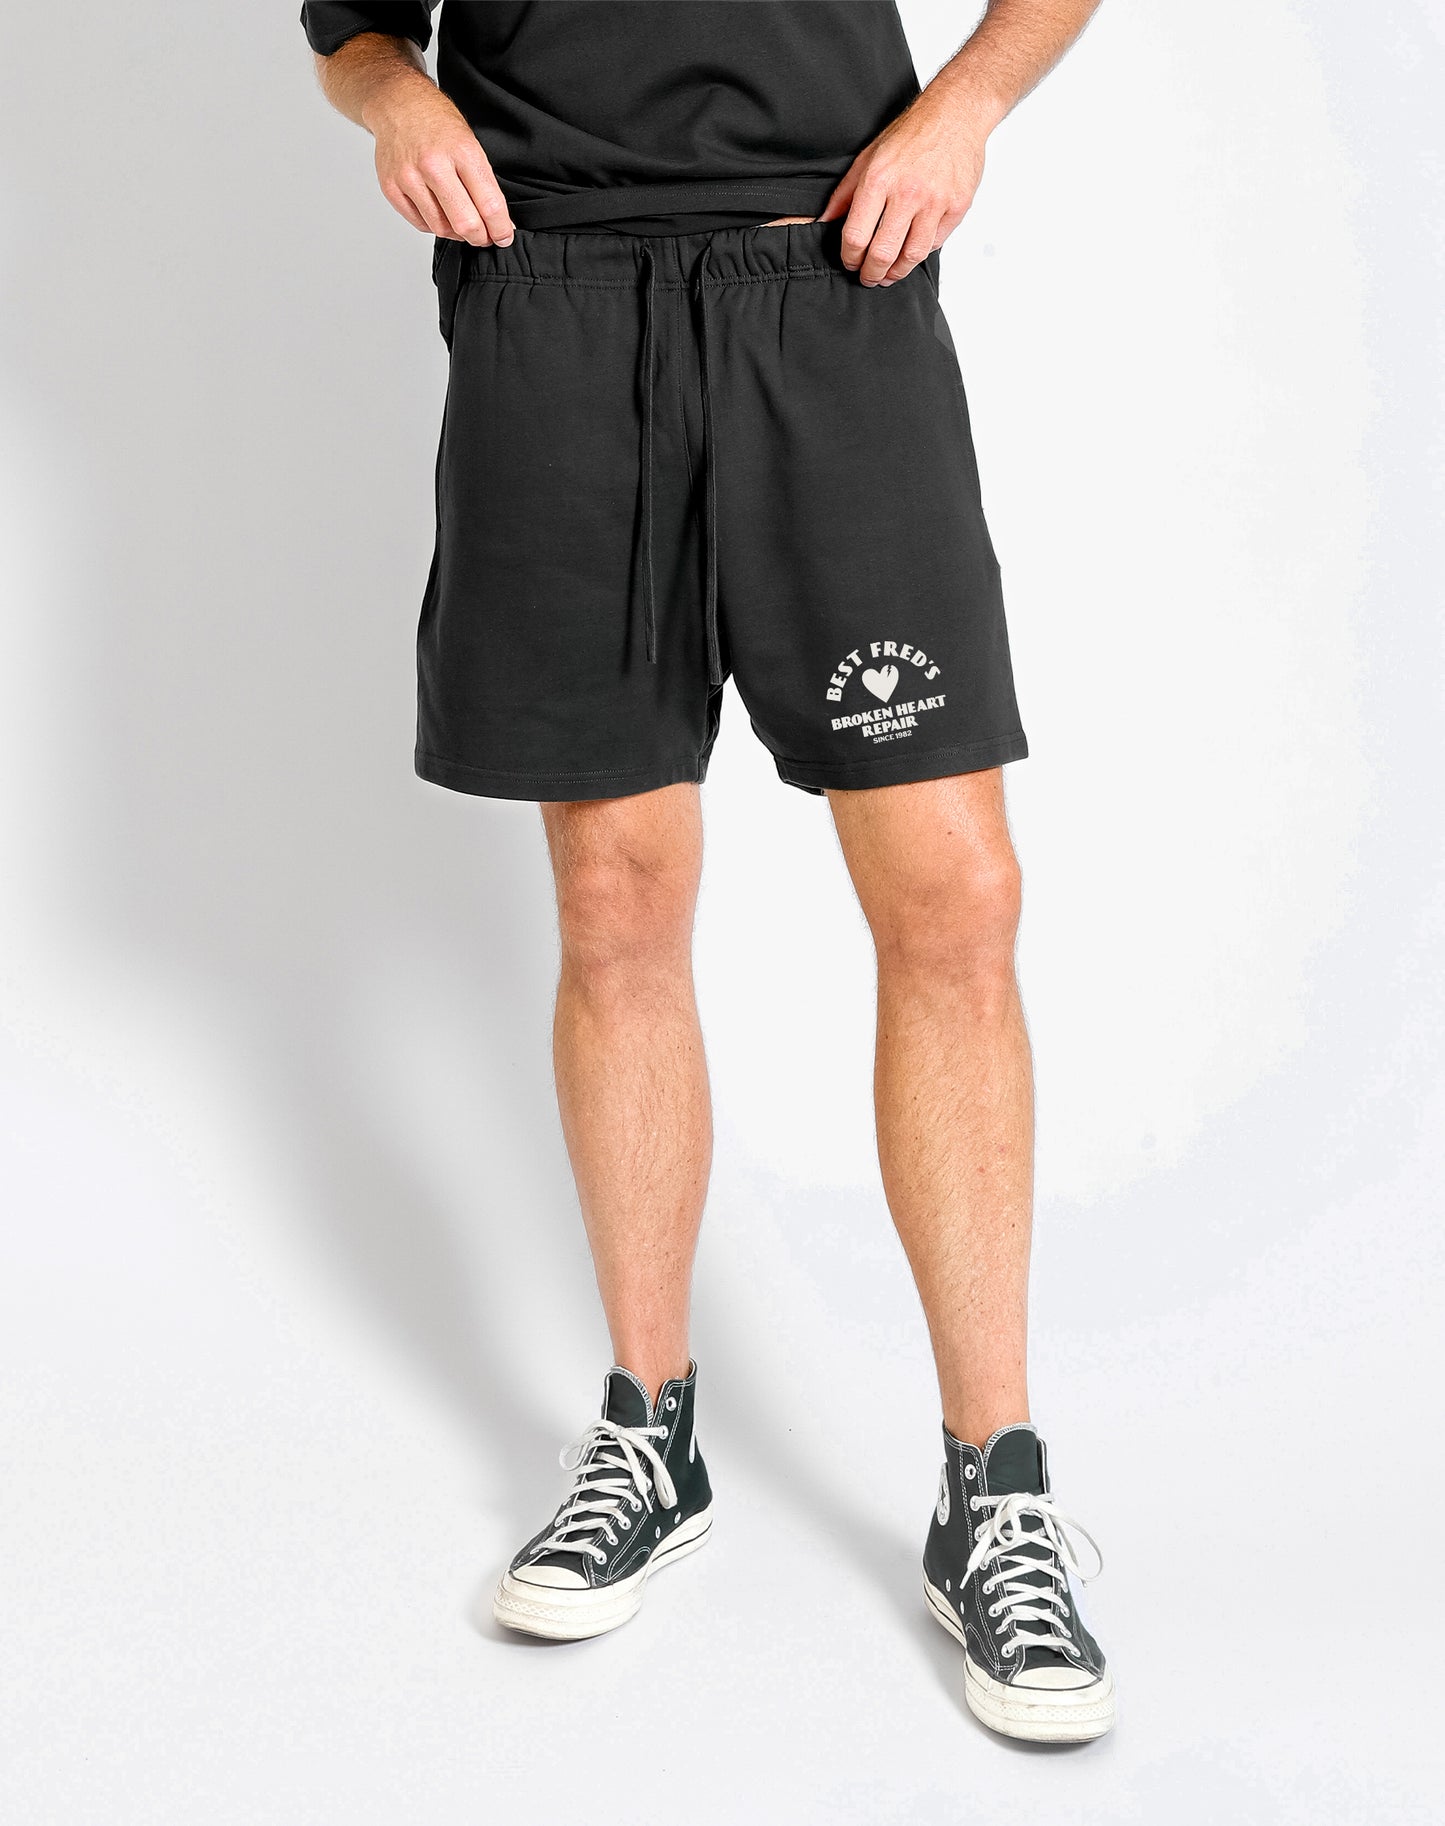 BEST FRED RELAXED FIT SHORT - BLACK